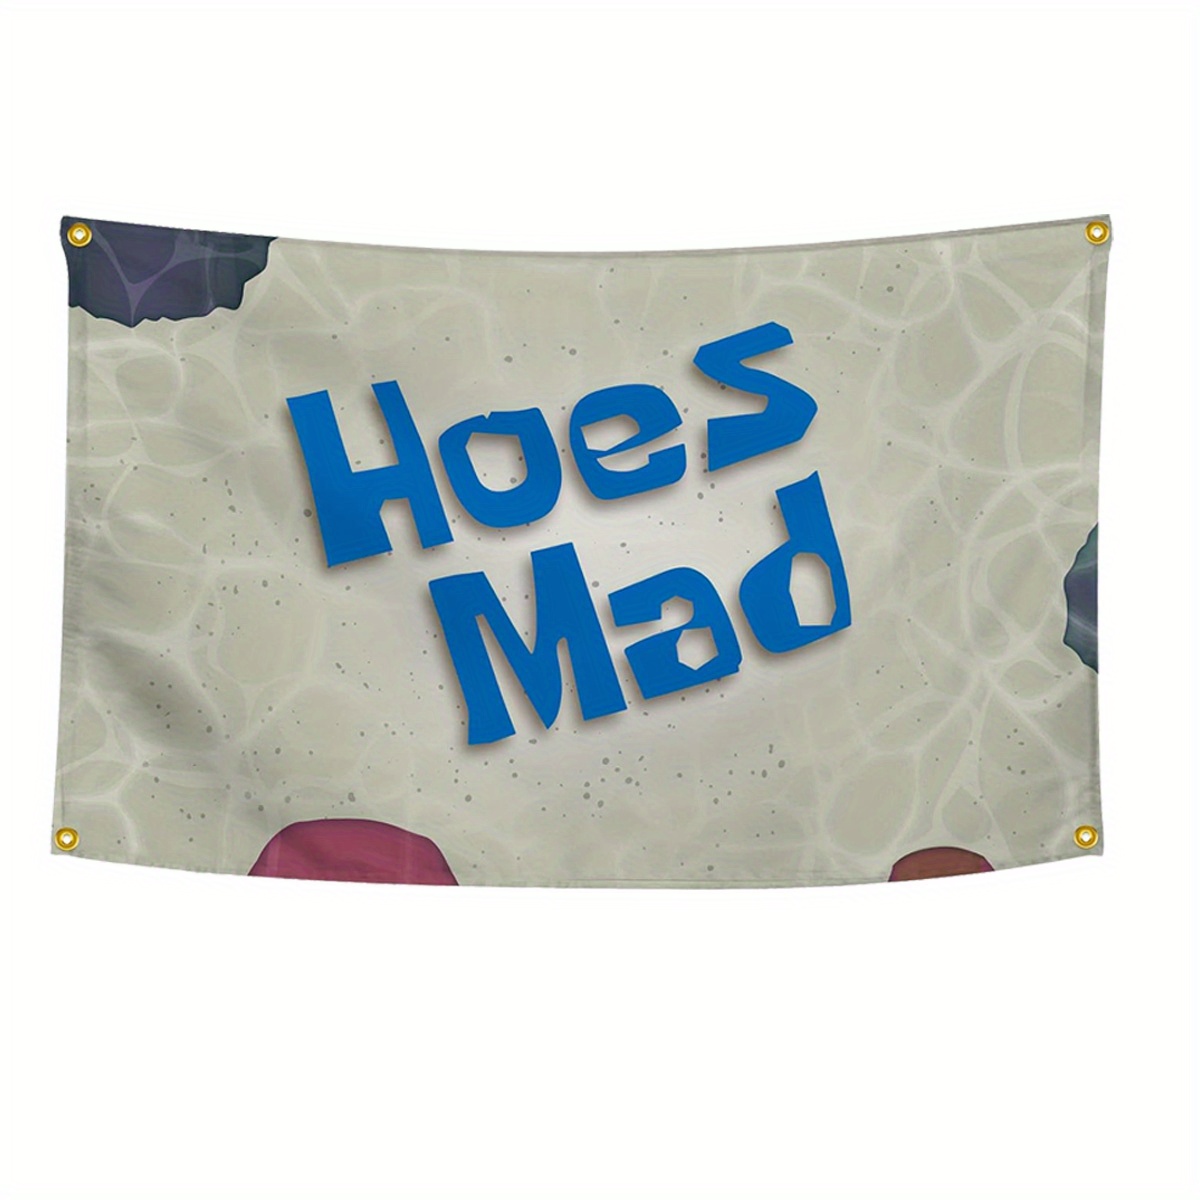 

1pc, Hoes Mad Funny Banner With 4 Brass Grommets, Suitable For Indoor Outdoor Decoration, Home Decor, Outdoor Decor, Yard Decor, Garden Decorations